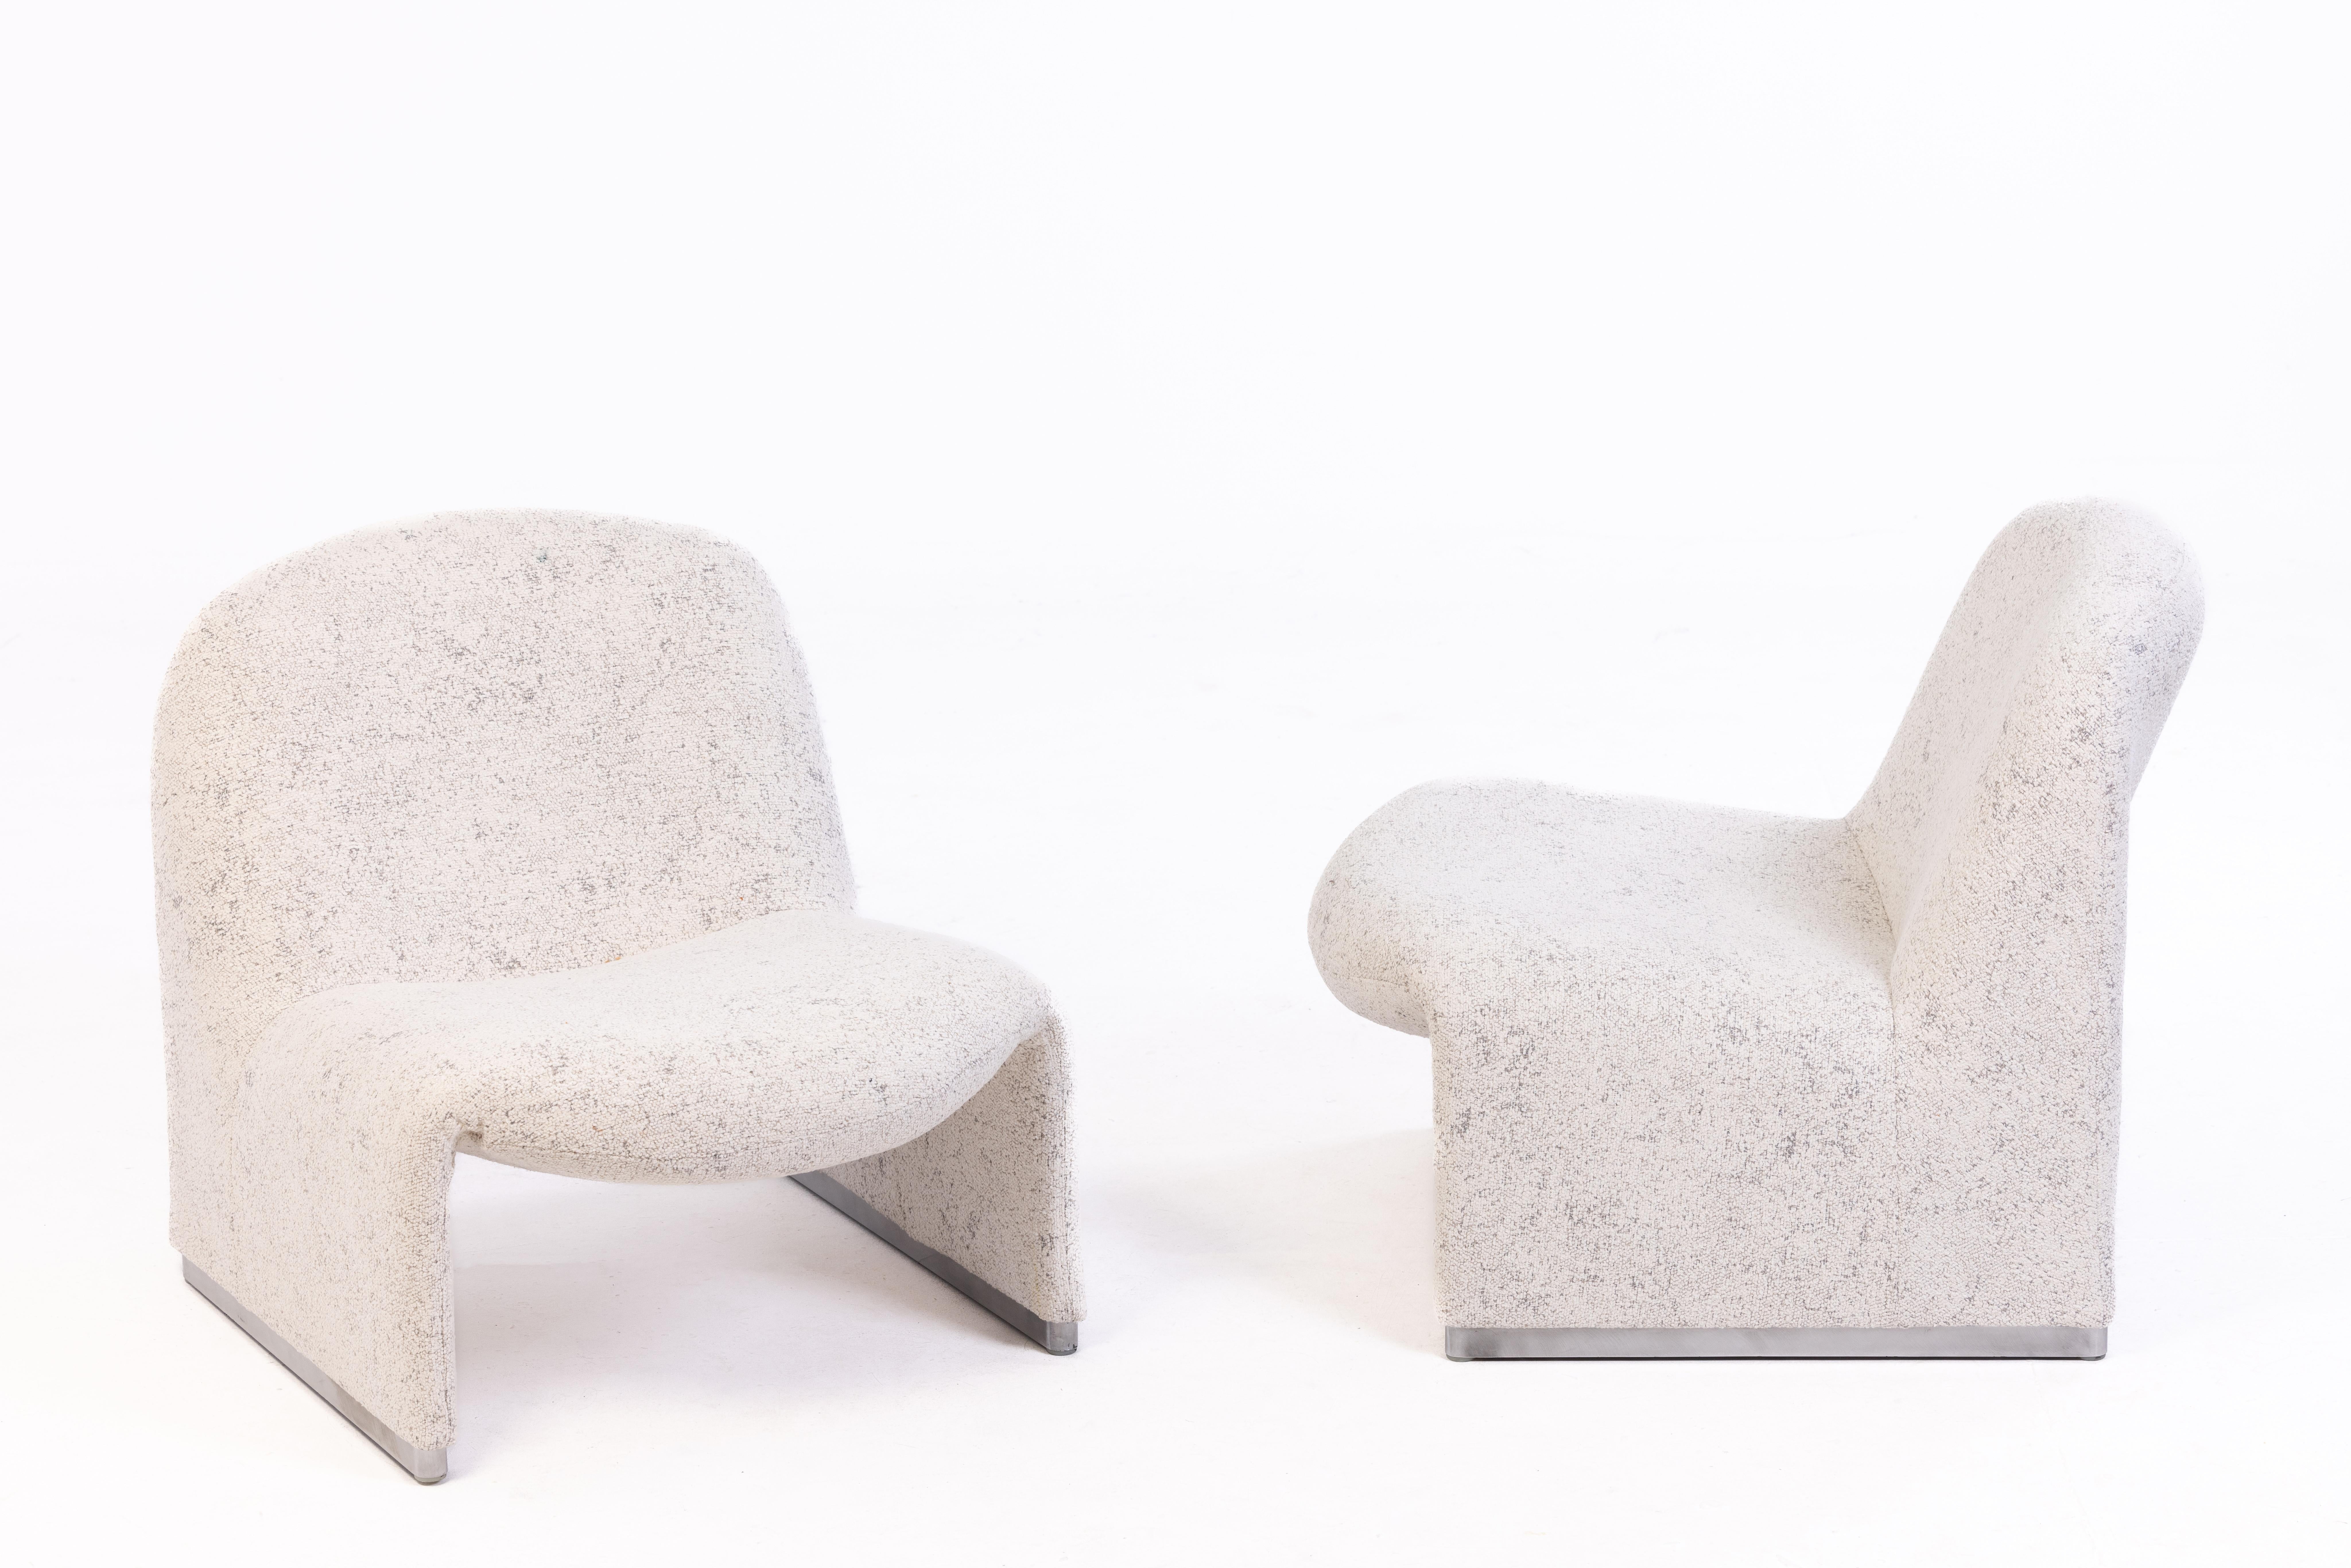 Mid-Century Modern Pair of Alky Lounge Chairs by Giancarlo Piretti, Italy 1970s, in Dedar Fabric